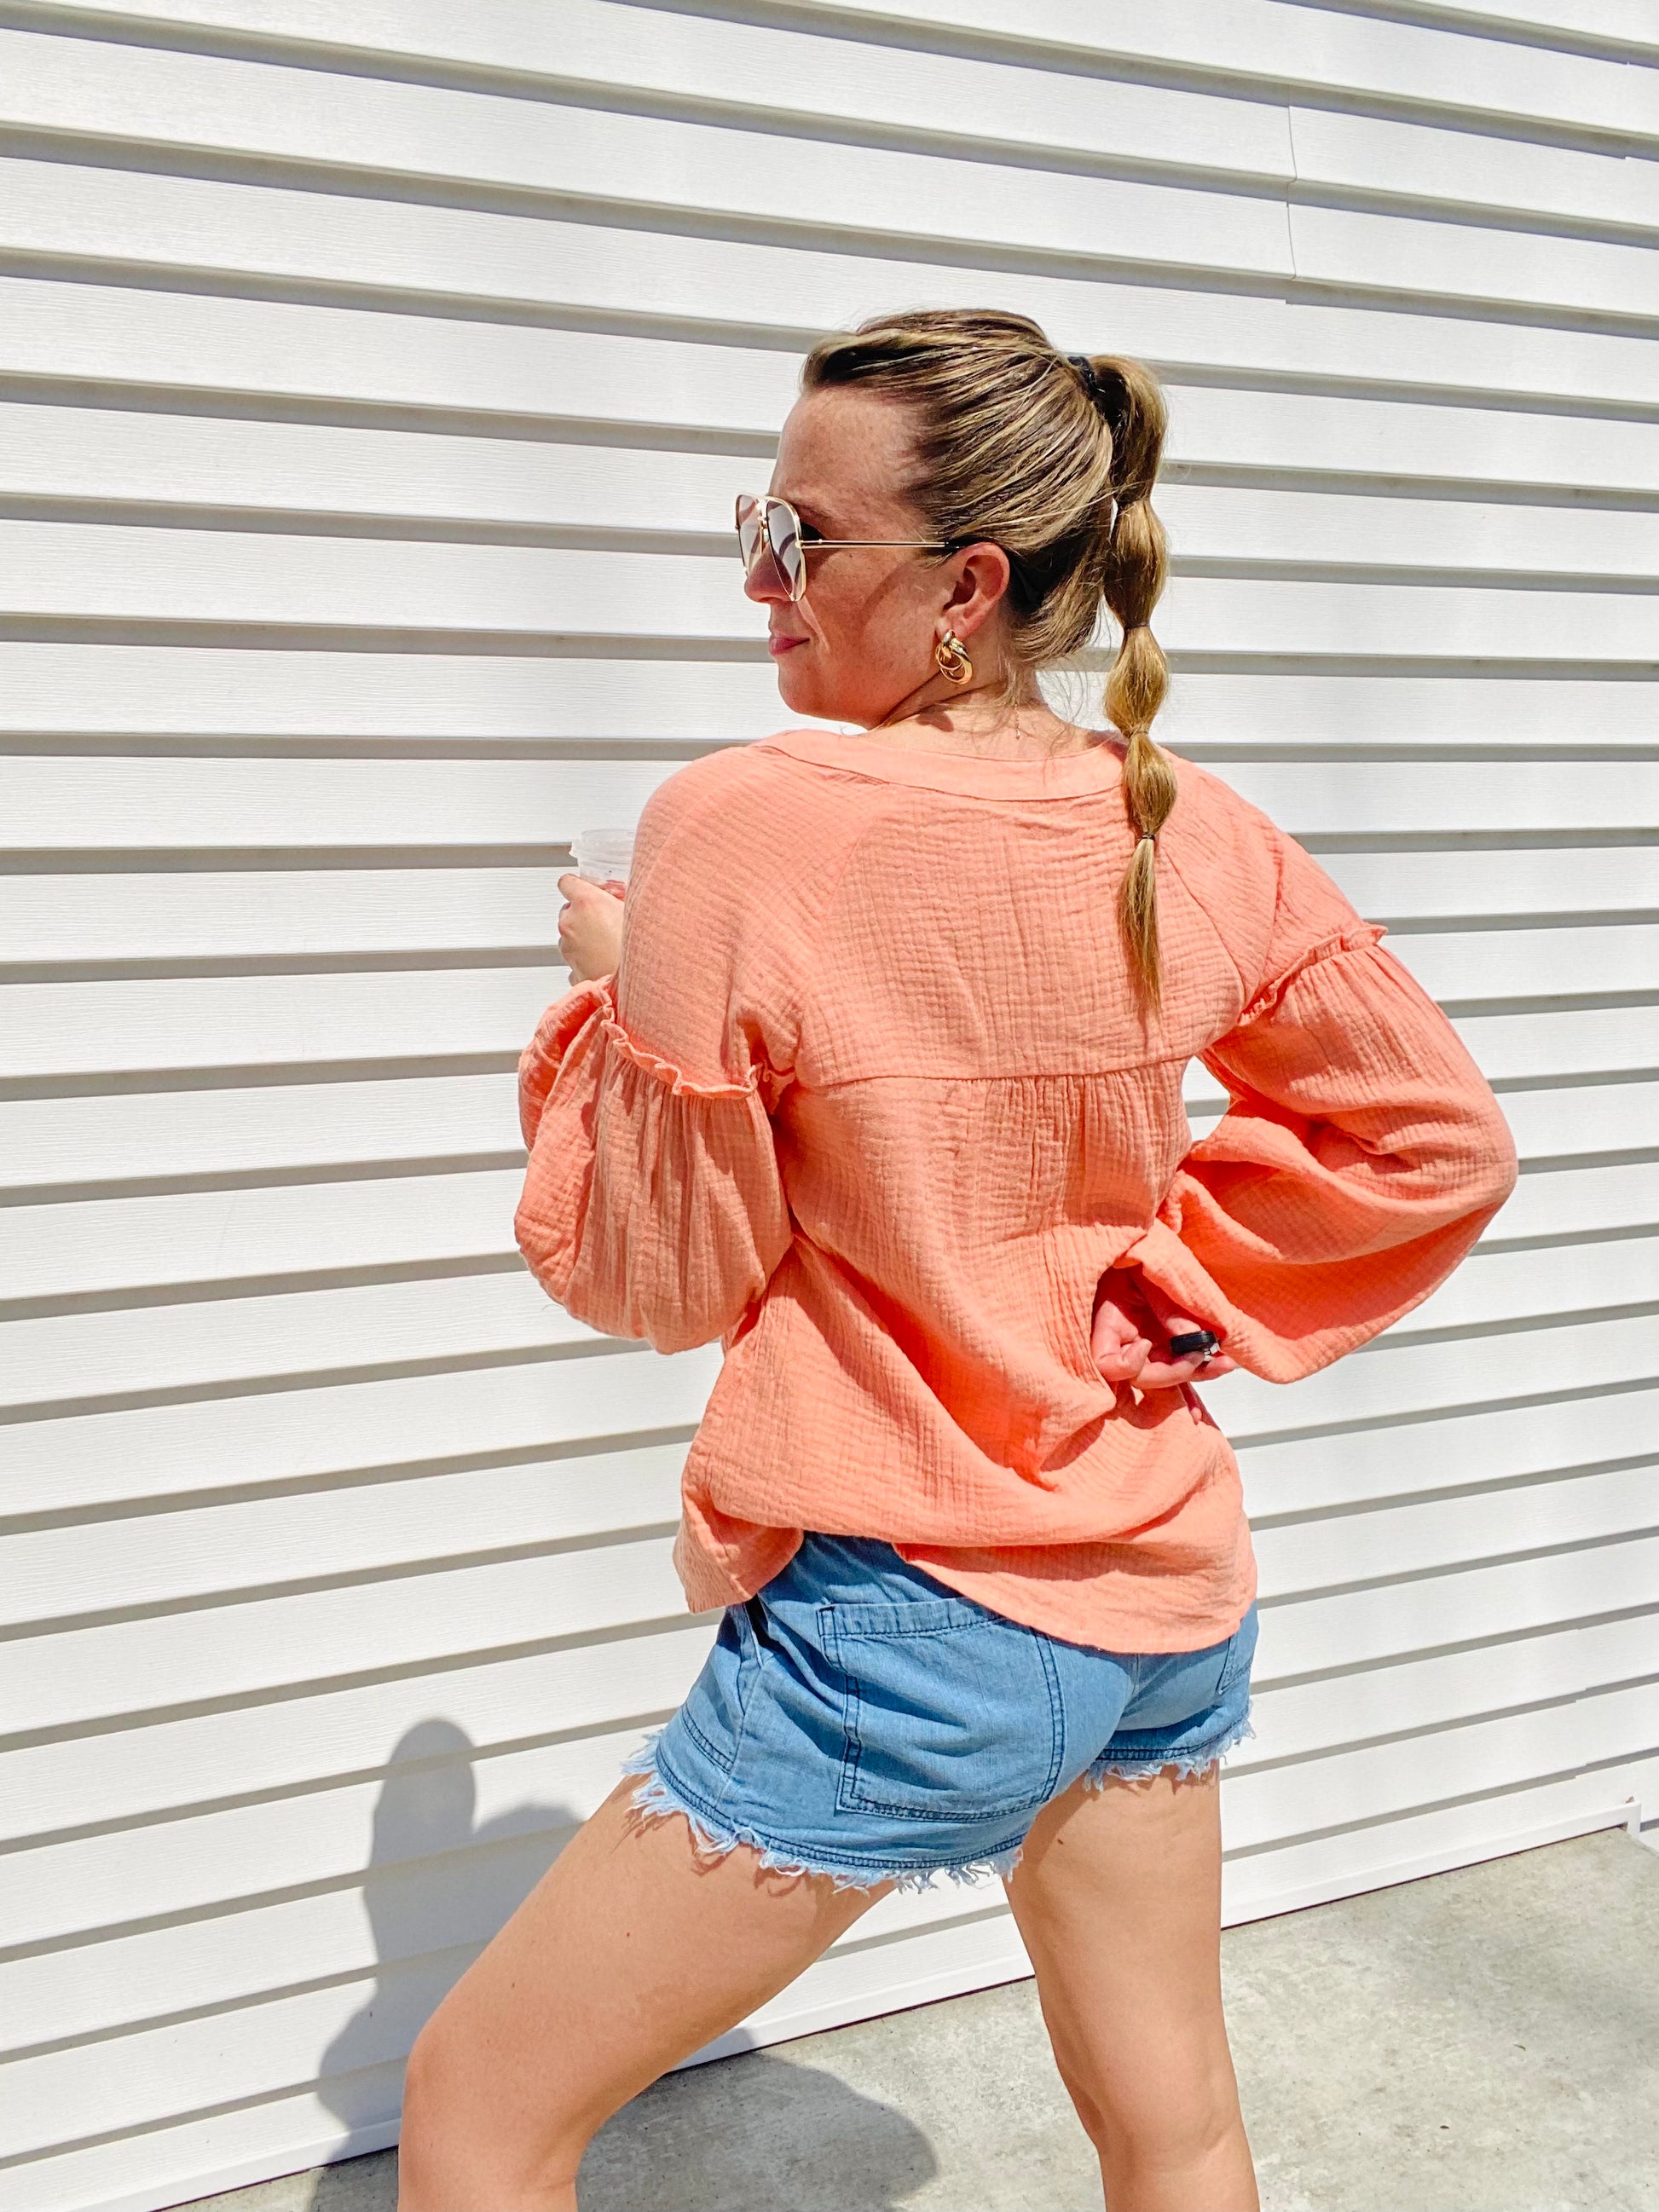 The Coral Love Gauzy Crinkle Top is the perfect addition to your wardrobe. Featuring casual balloon sleeves and functioning buttons, this top is ideal for achieving a relaxed yet stylish look. Wear it with denim and sandals for an effortless yet cute outfit.